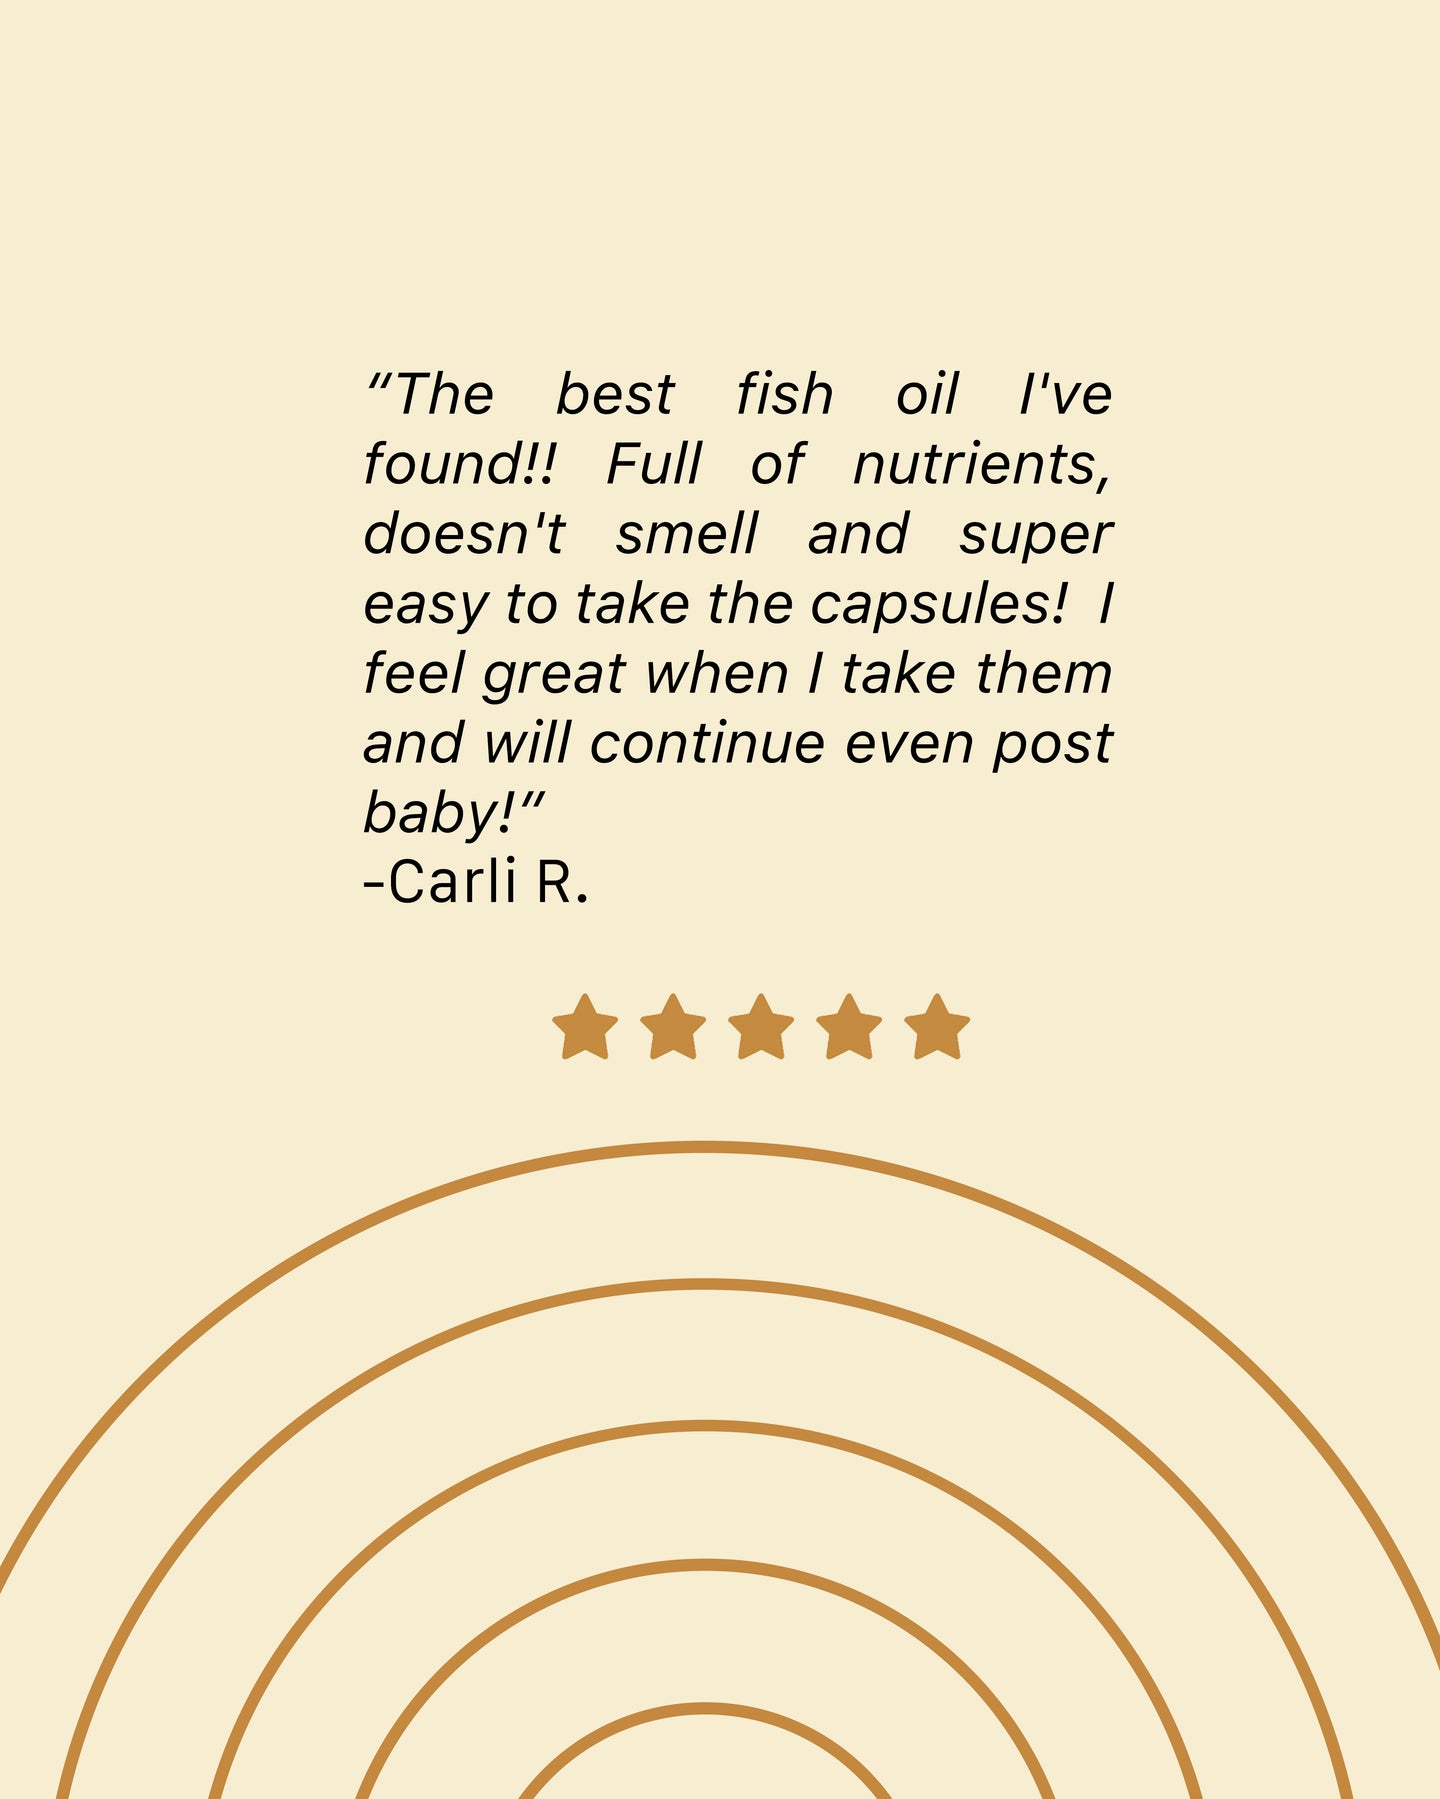 A review by Carli R  The best fish oil I've found full of nutrients doesn't smell and super easy to take the capsules I feel great when I take them and will continue even post baby